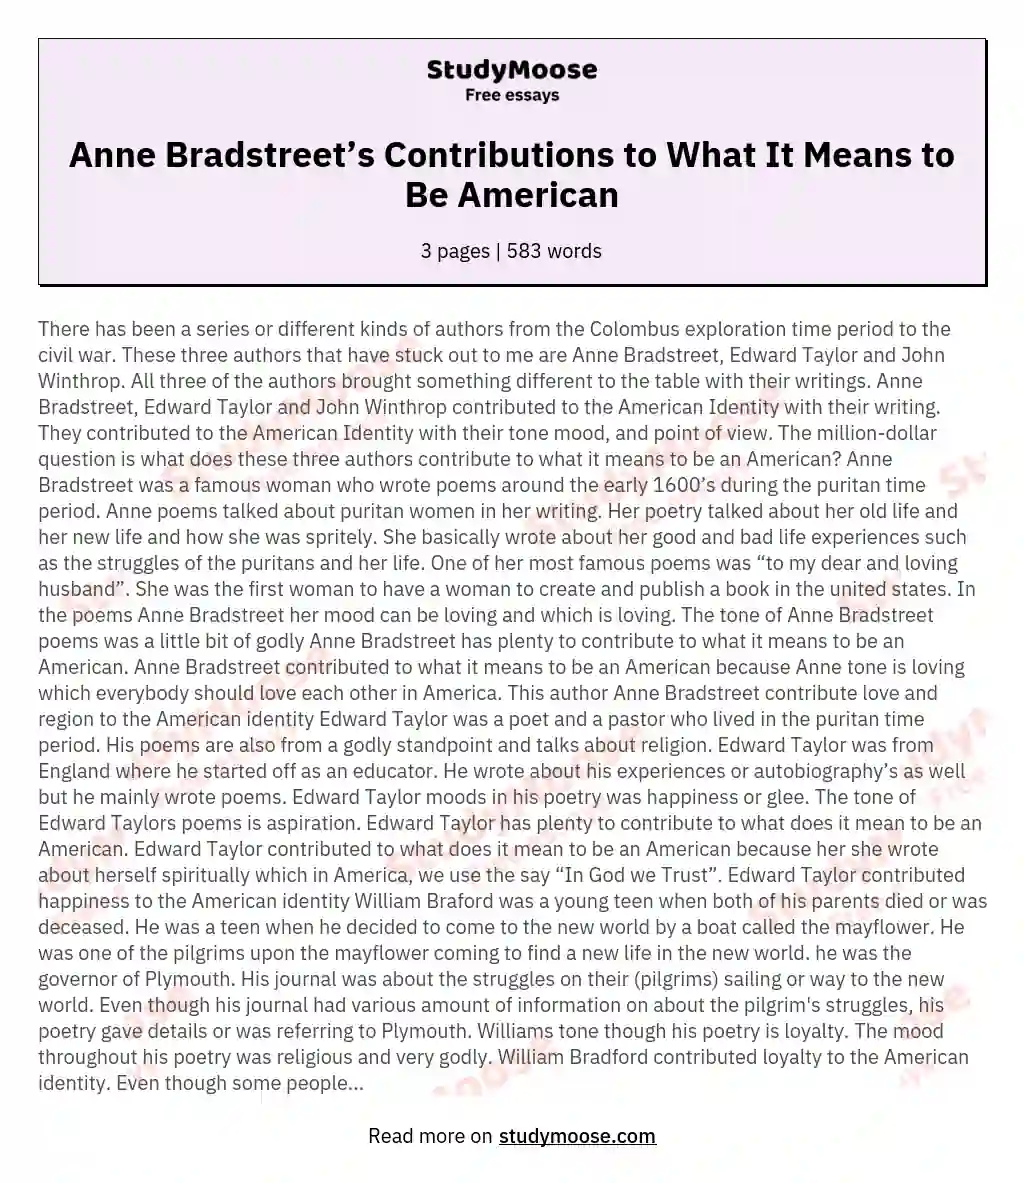 Anne Bradstreet’s Contributions to What It Means to Be American essay